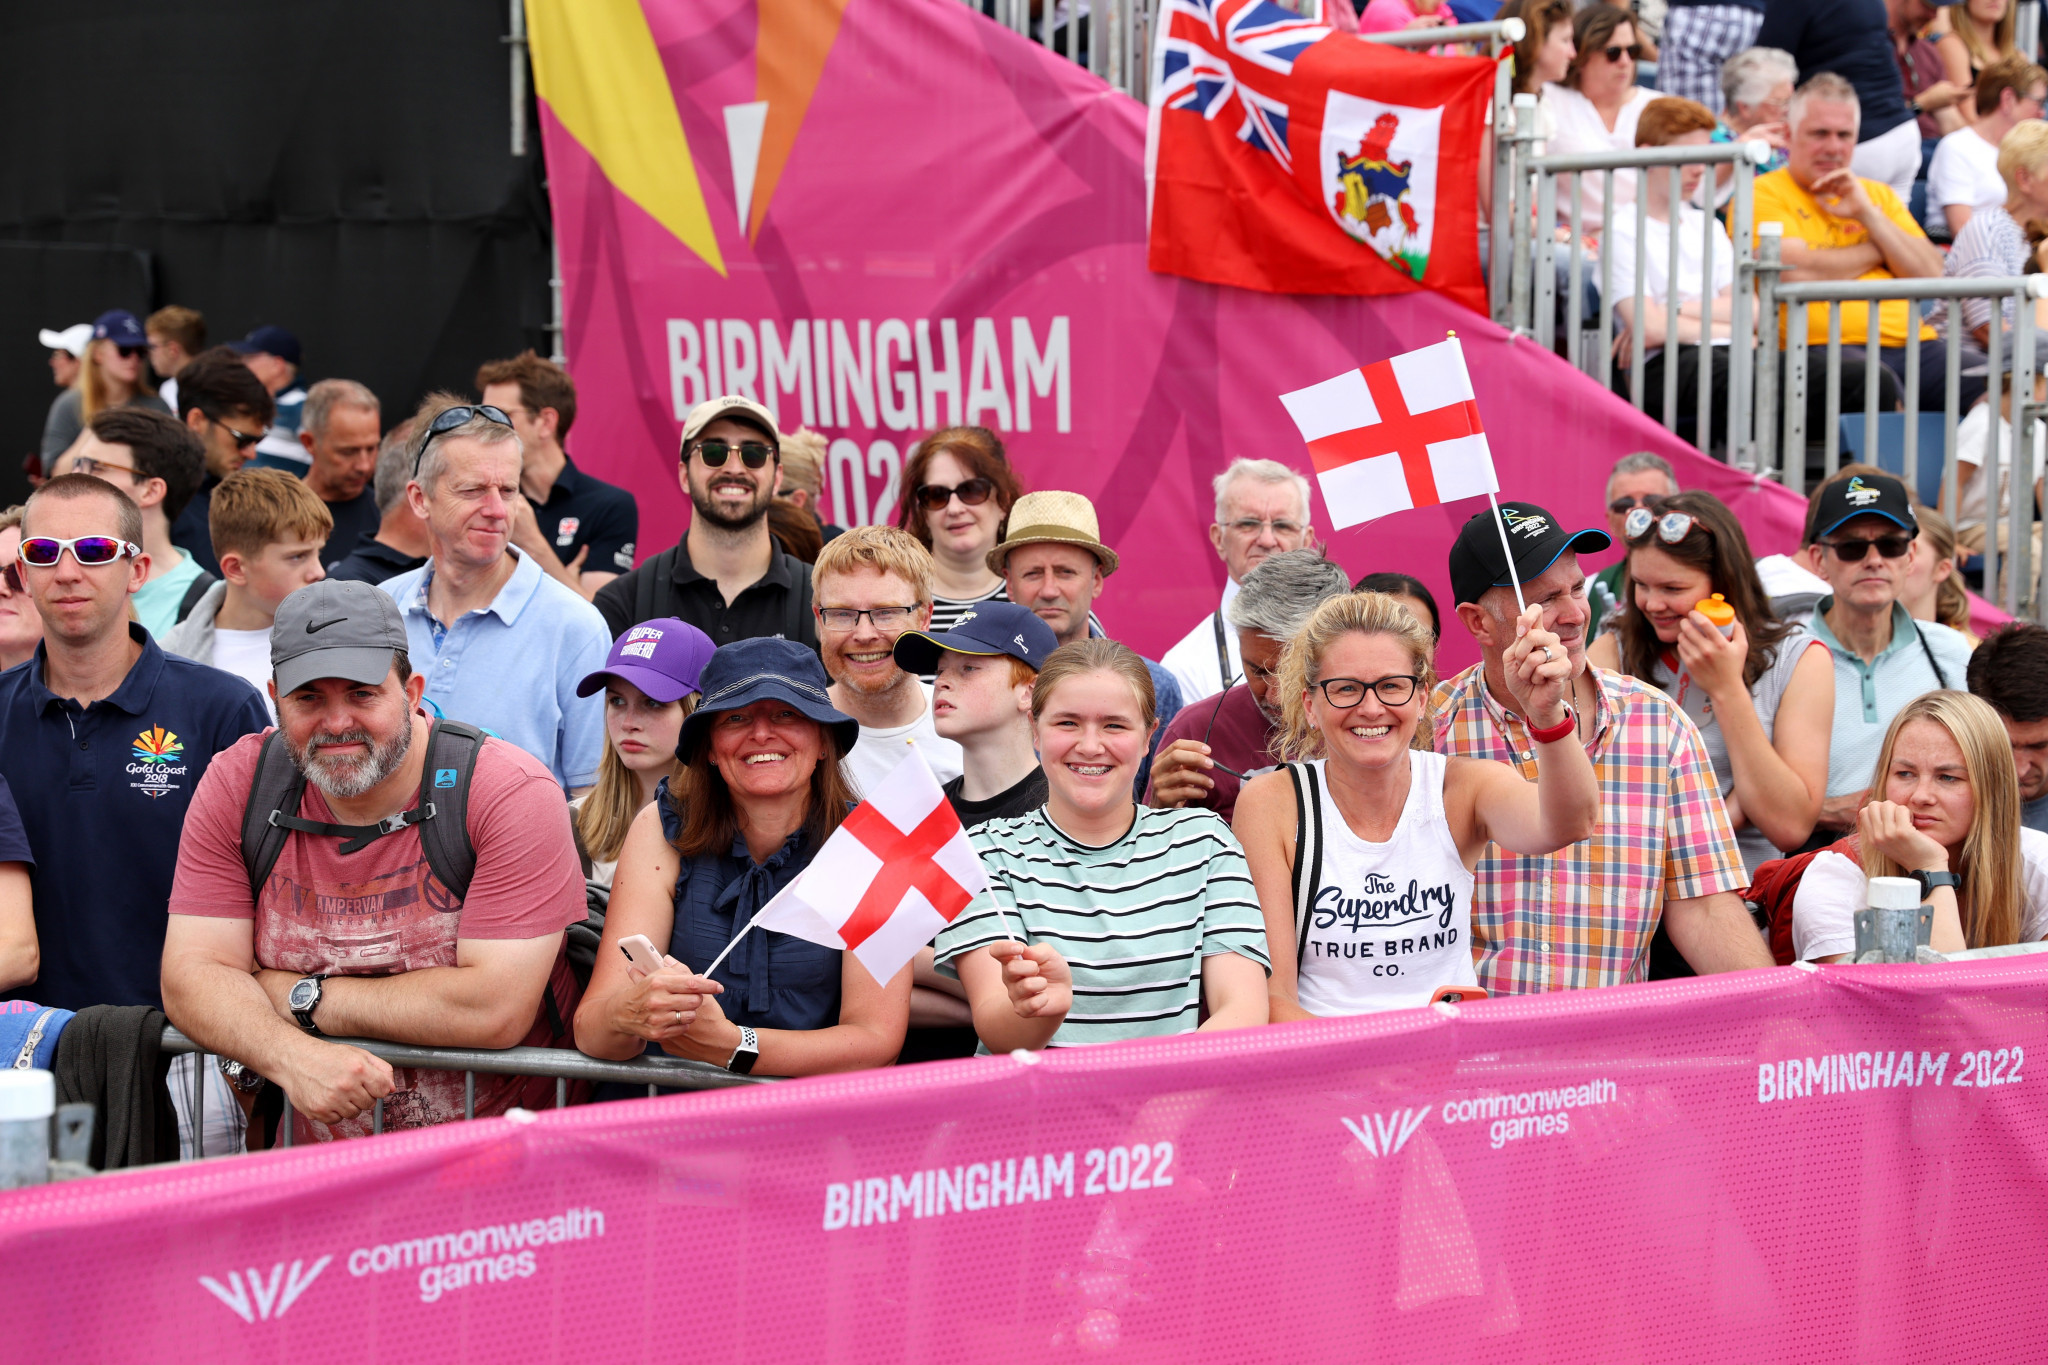 Birmingham 2022 delight over record-breaking ticket sales for Commonwealth Games